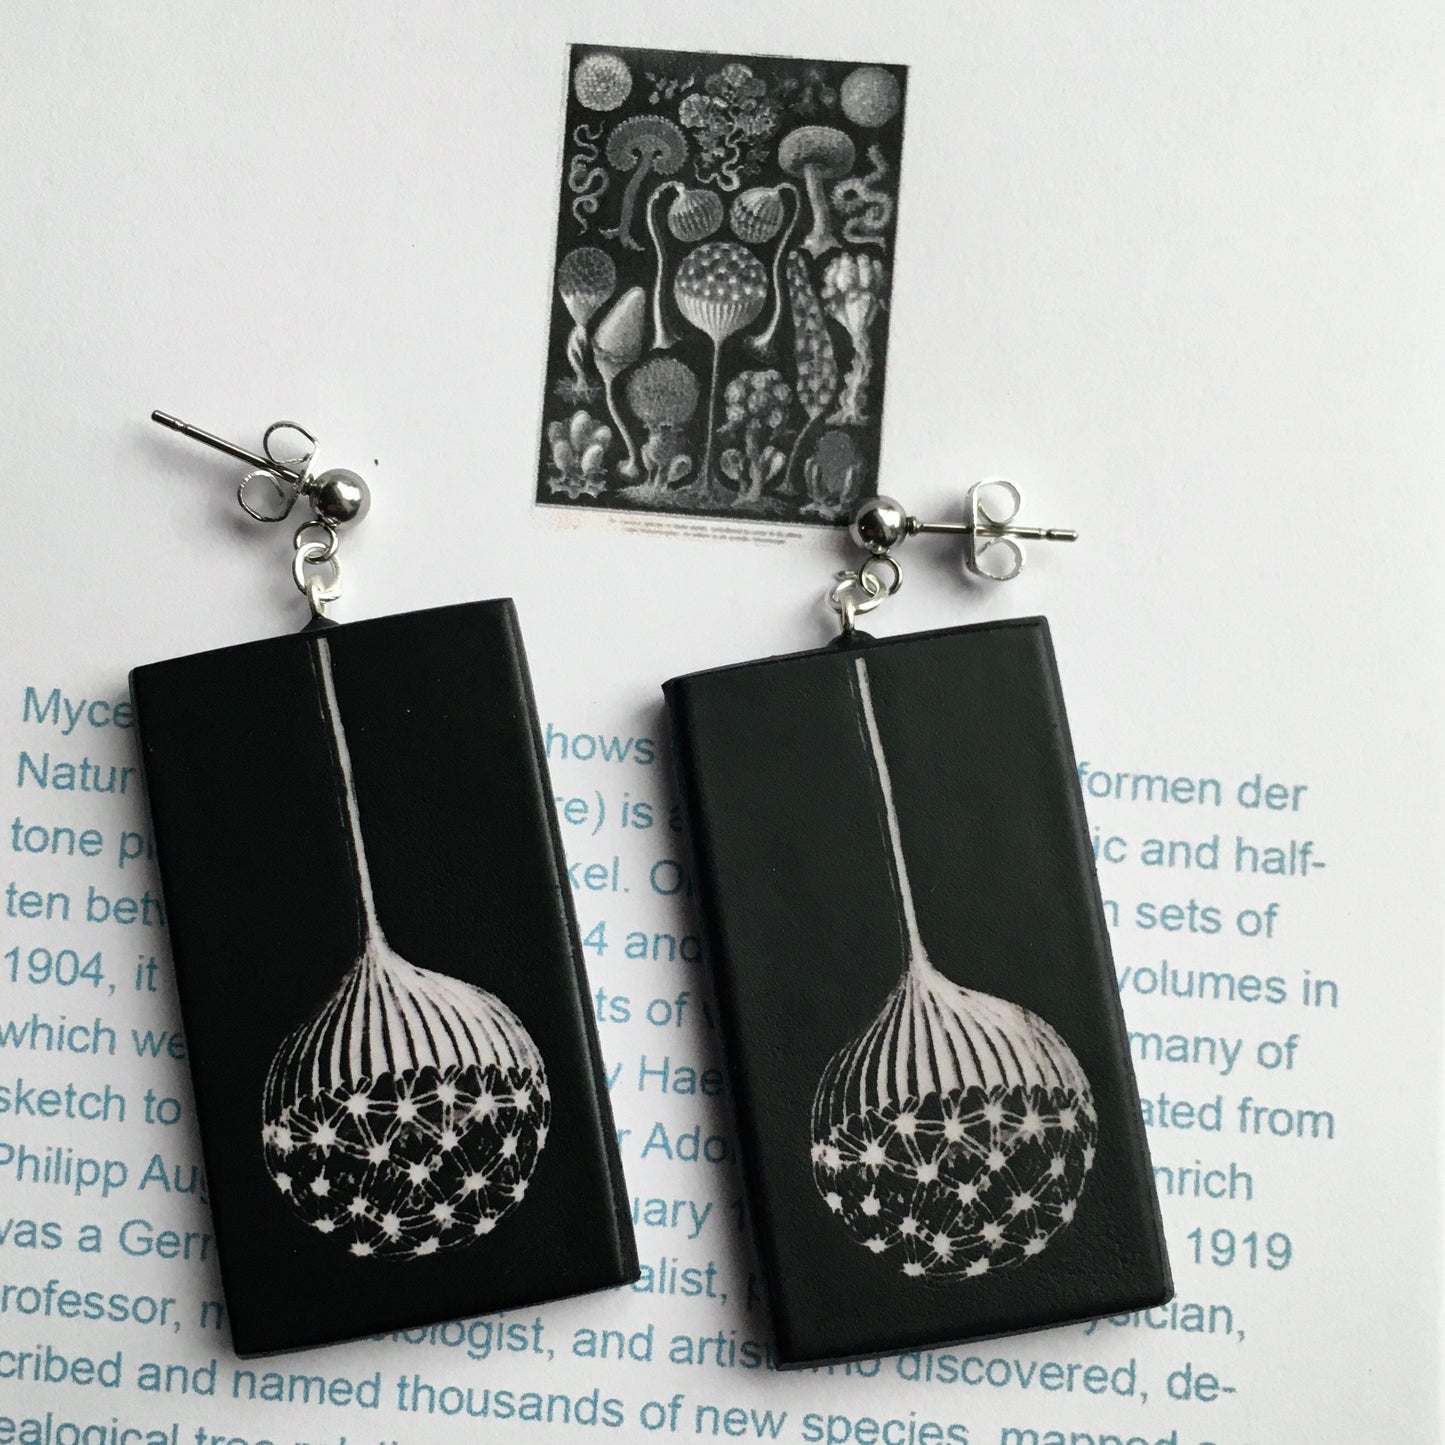 Black and white silver stud earrings on wood inspired by Ernst Haeckel scientific illustration Mycetozoa from Art Forms in Nature. 